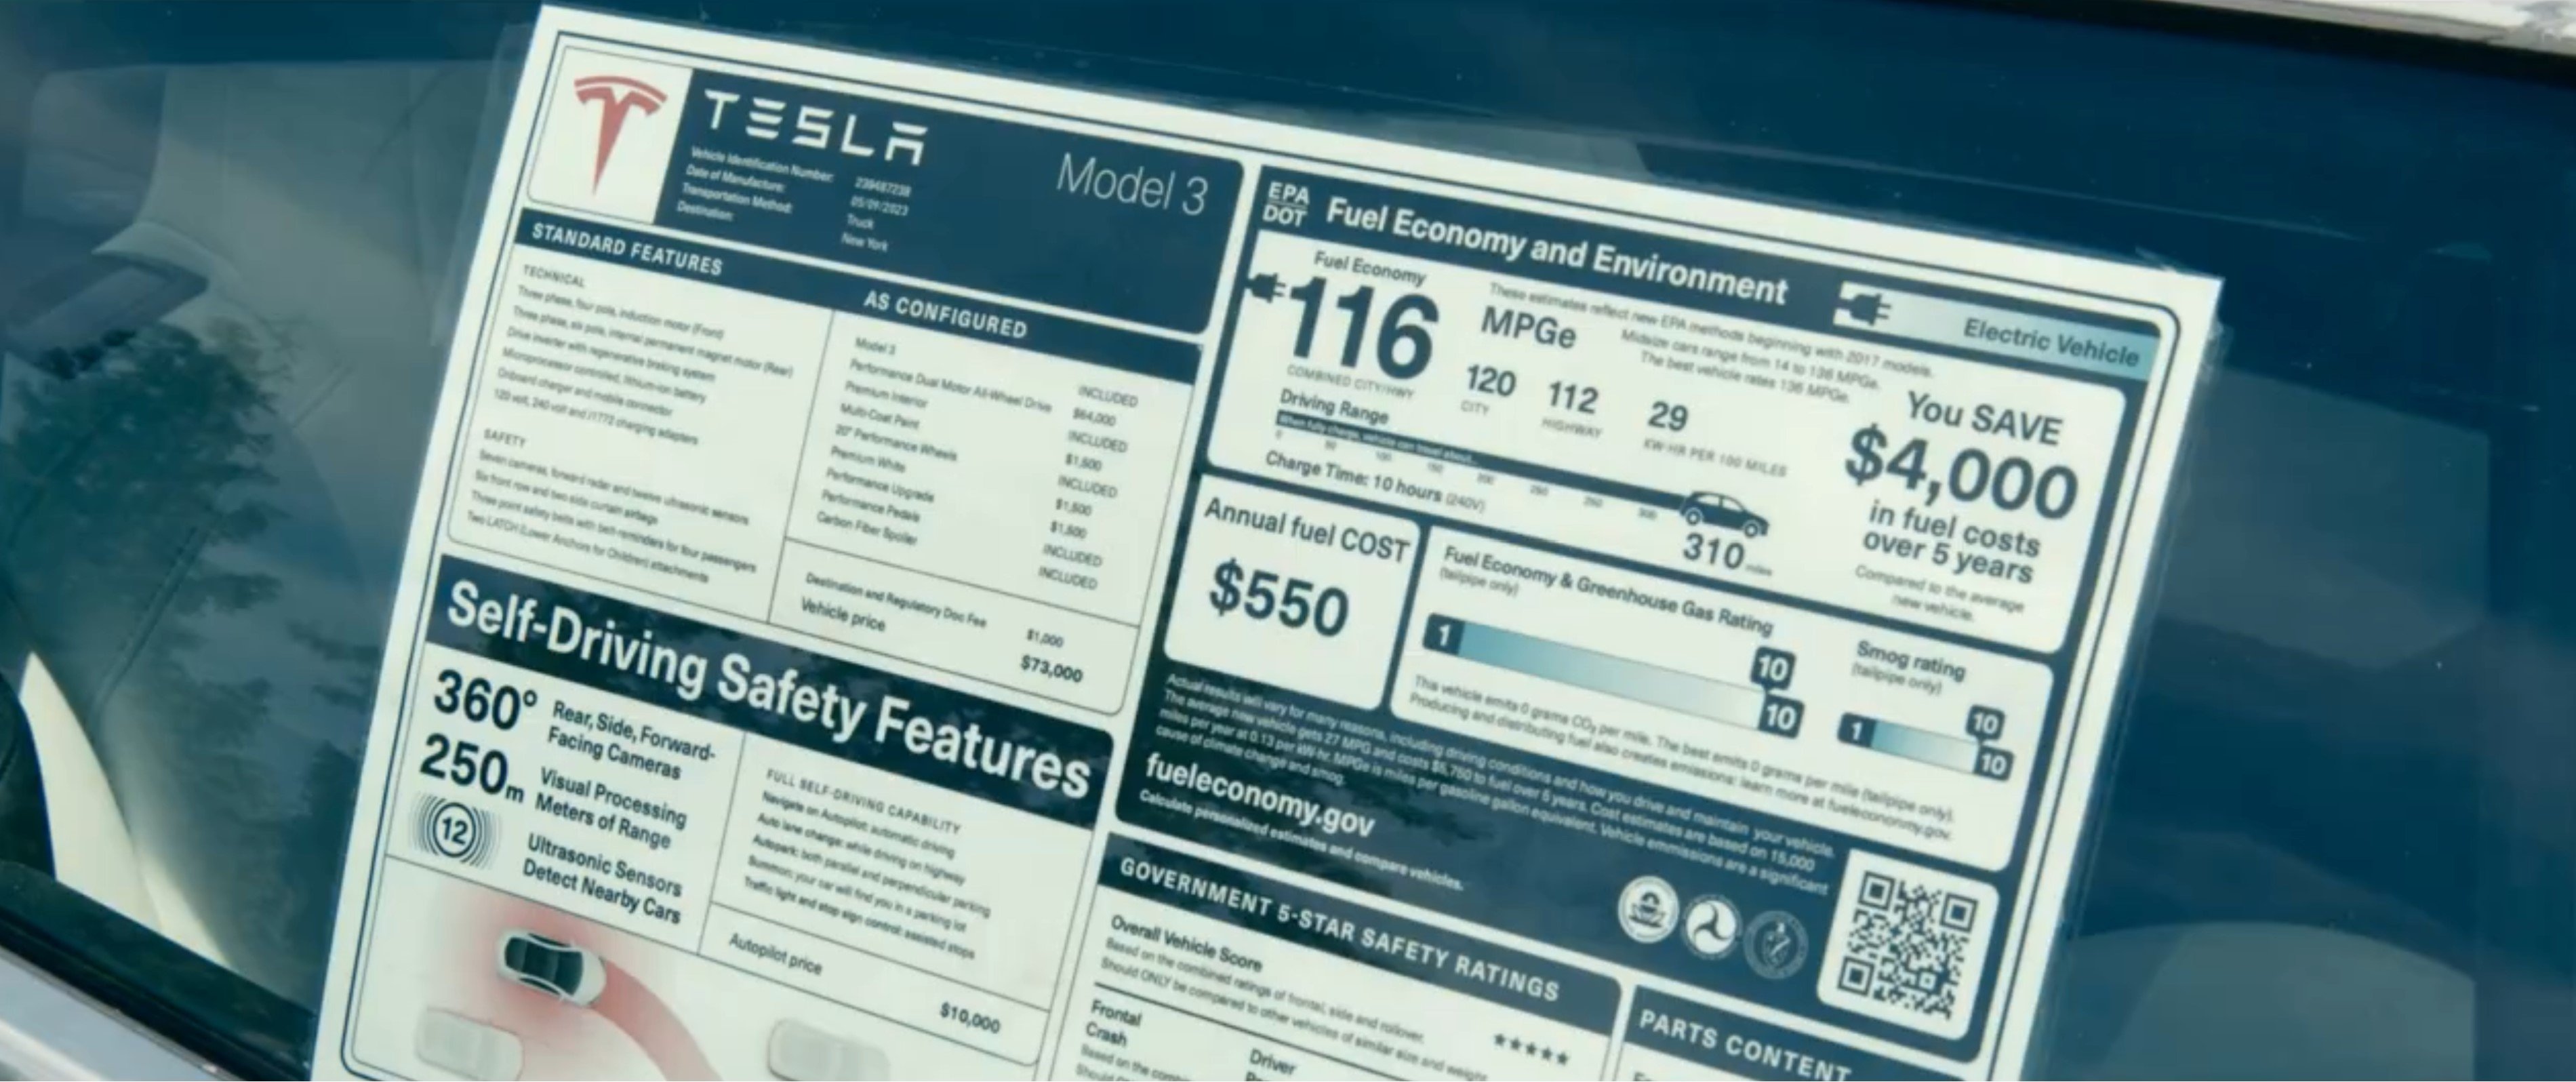 Netflix Posts Movie Clip of Rogue Self-Driving Teslas Nearly